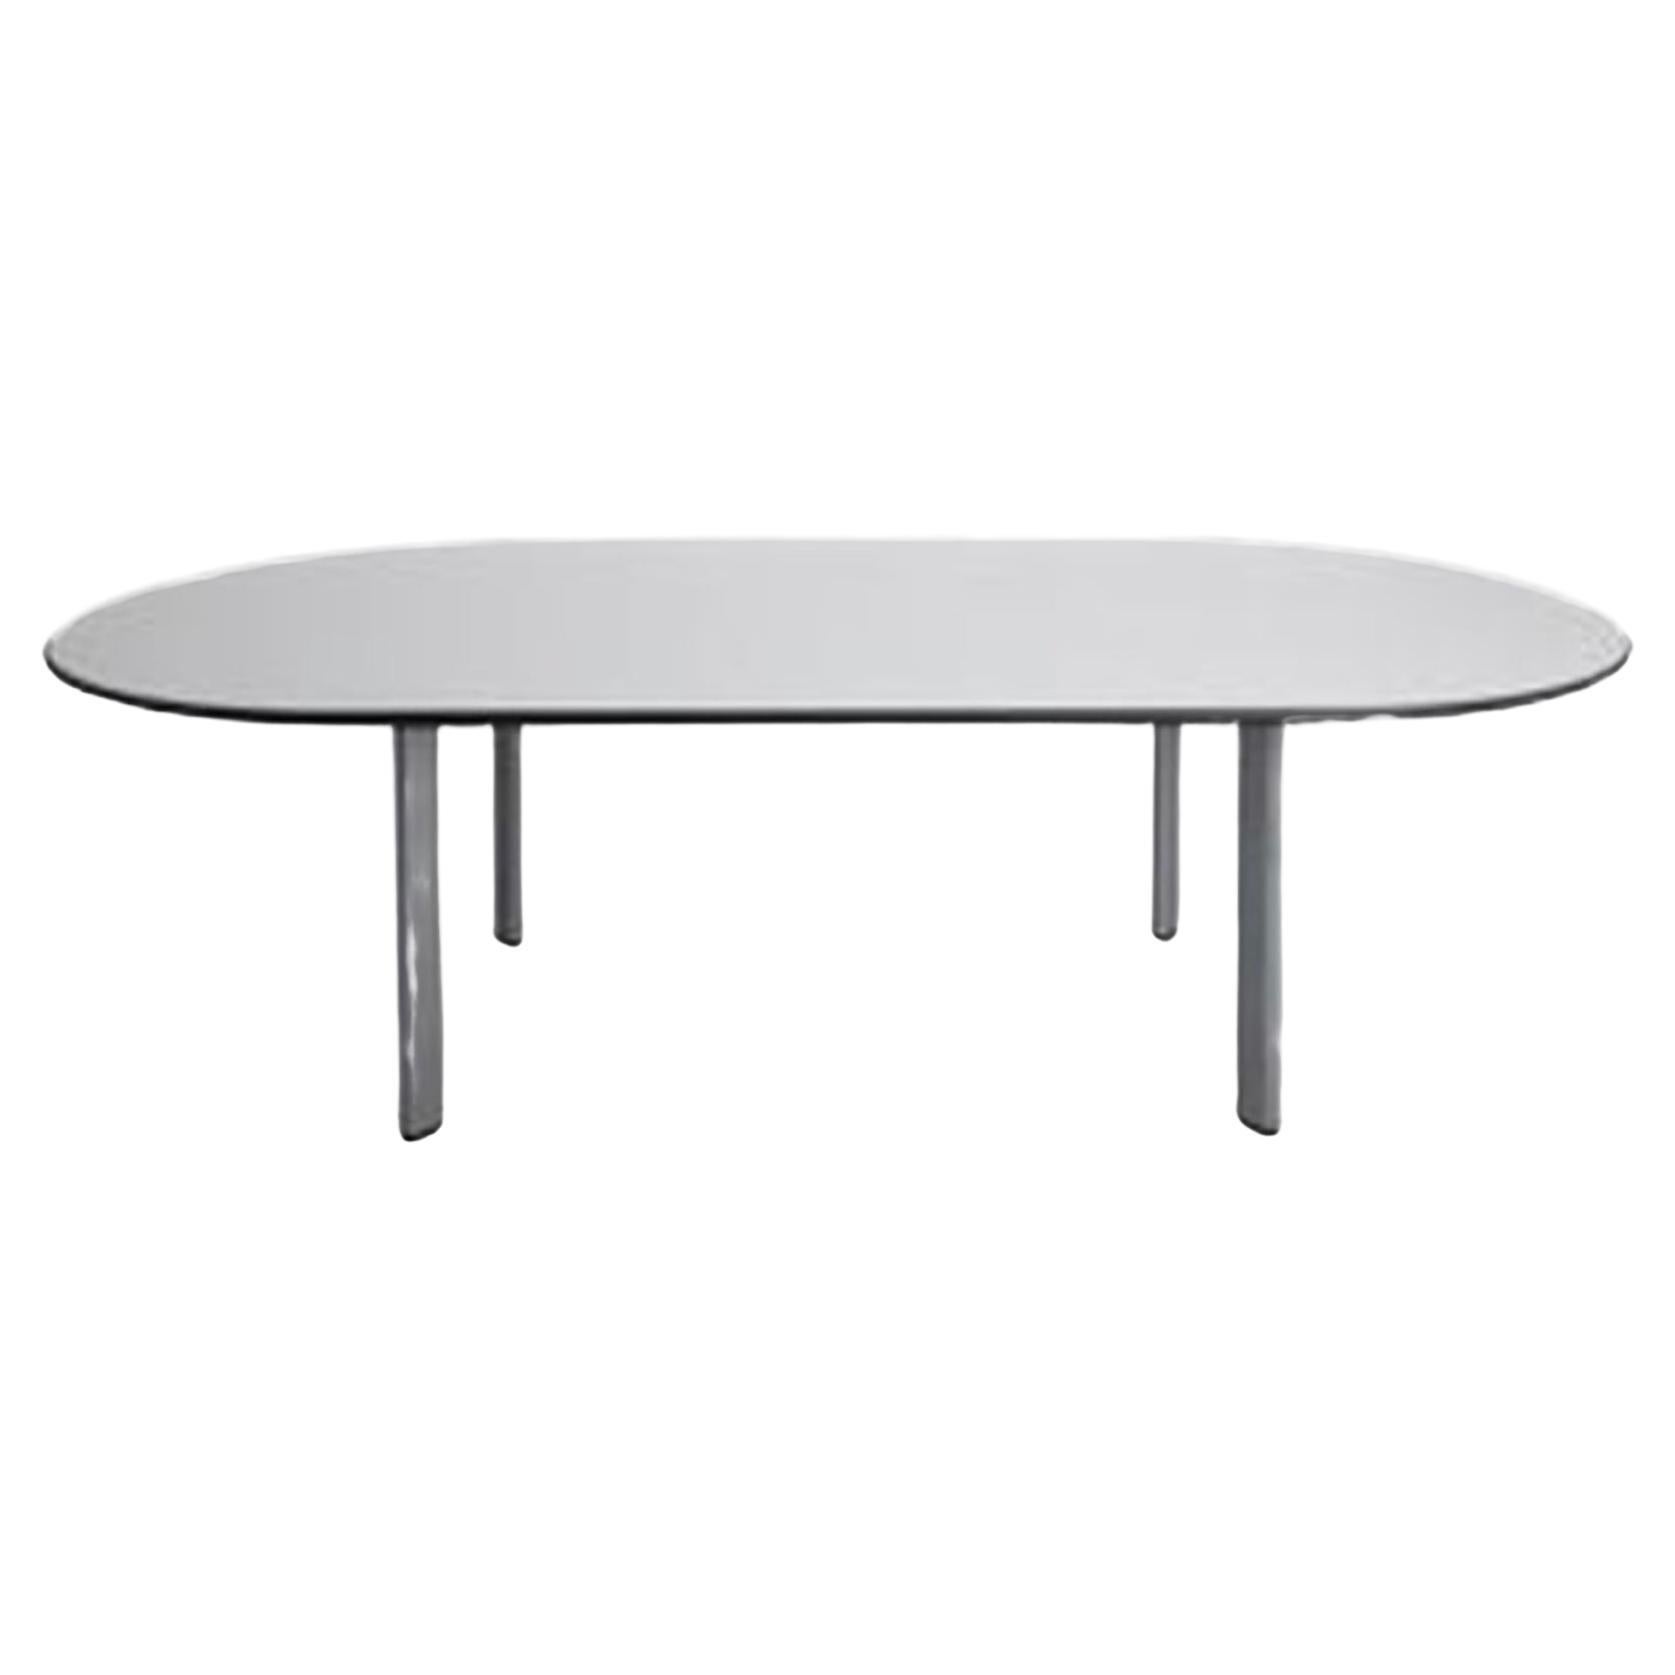 Post modern Knoll white laminate racetrack dining table by joe d'urso 